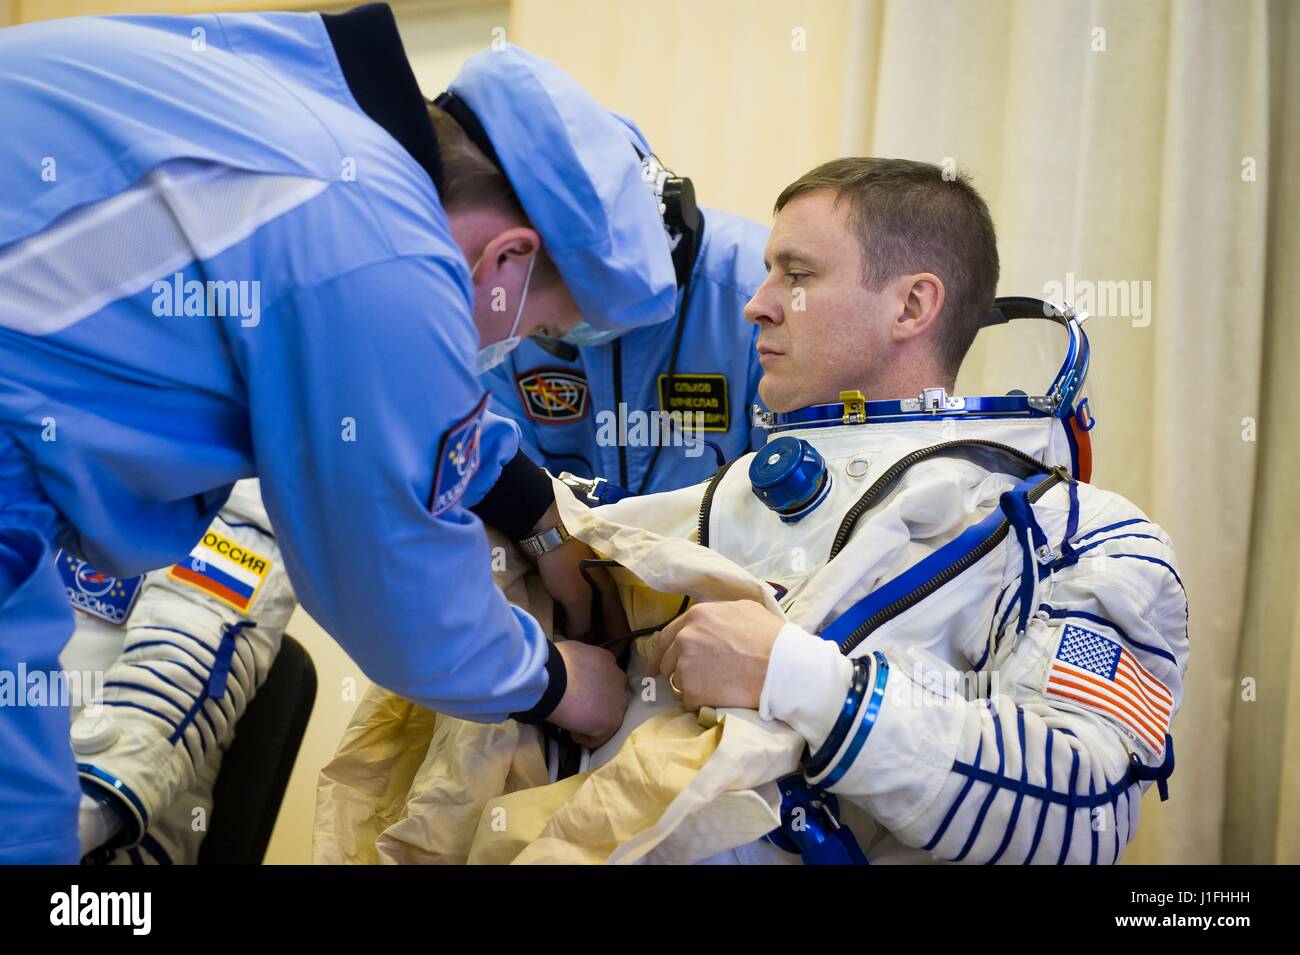 NASA International Space Station Expedition 51 prime crew member American astronaut Jack Fischer suits up for a fit check in the Soyuz MS-04 spacecraft during pre-launch preparations at the Baikonur Cosmodrome Integration Building April 6, 2017 in Baikonur, Kazakhstan.      (photo by Andrey Shelepin /NASA   via Planetpix) Stock Photo